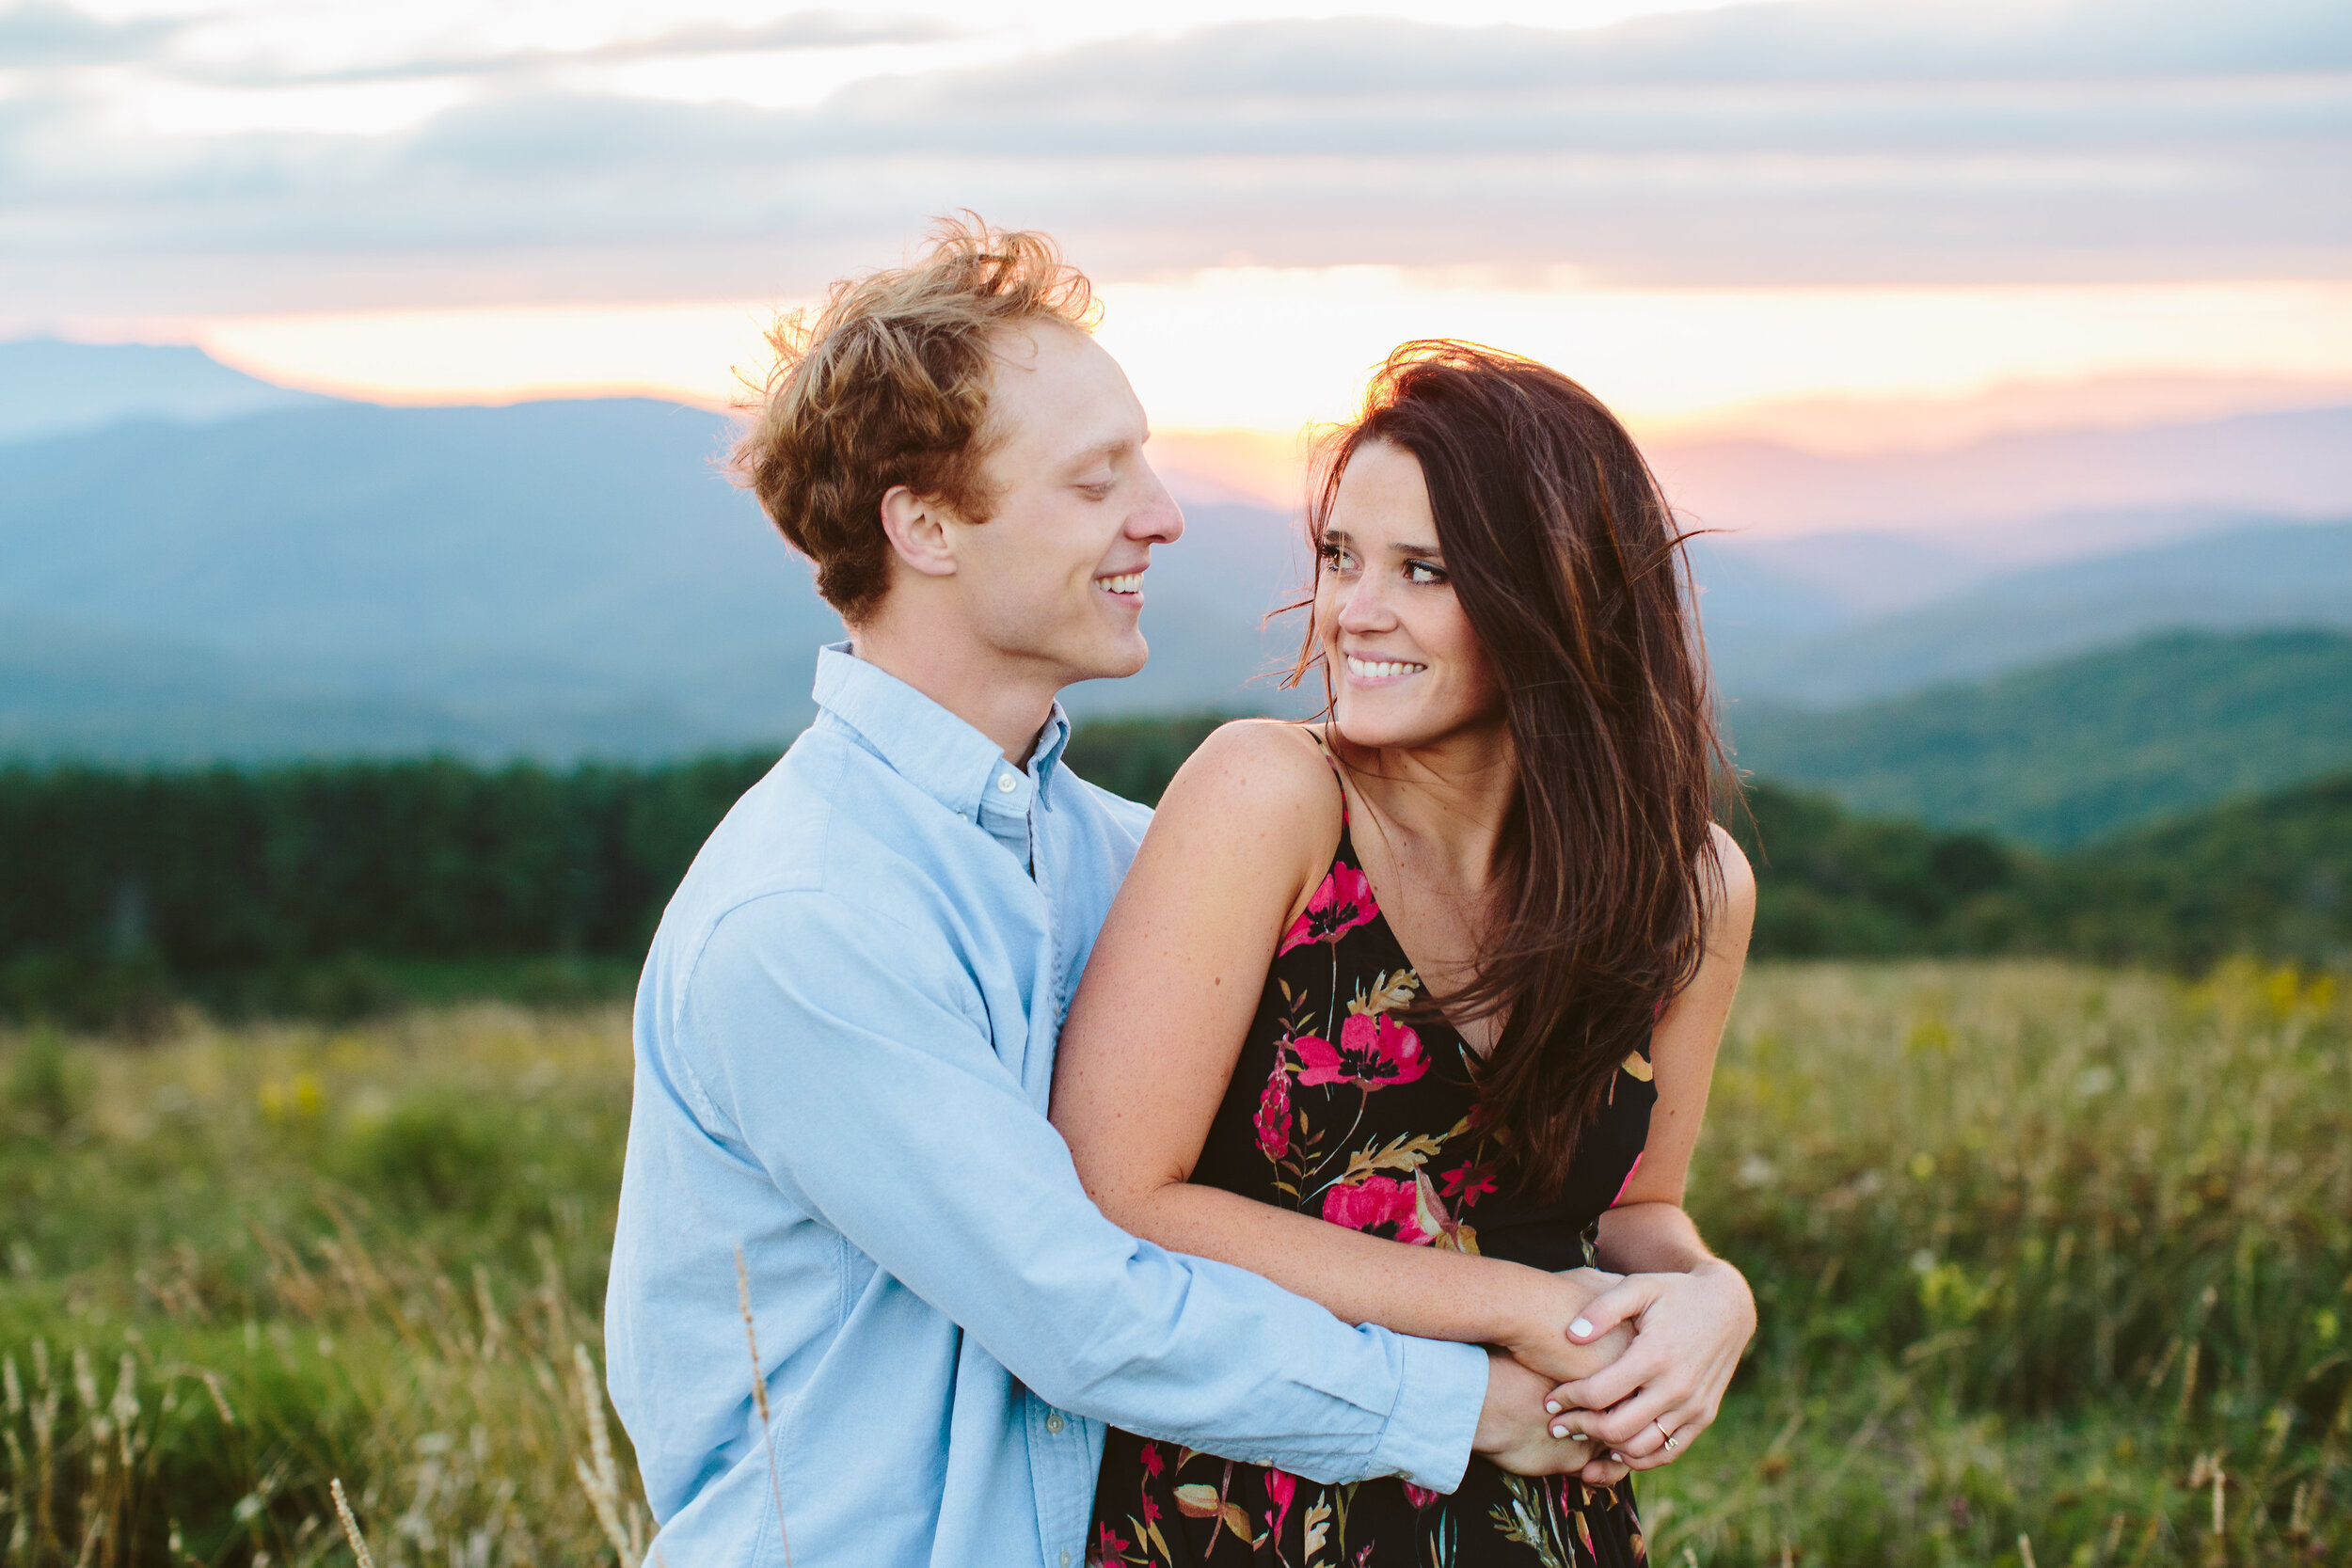 Max Patch Summer Engagement Photos on the Mountain at Sunset couple laughing